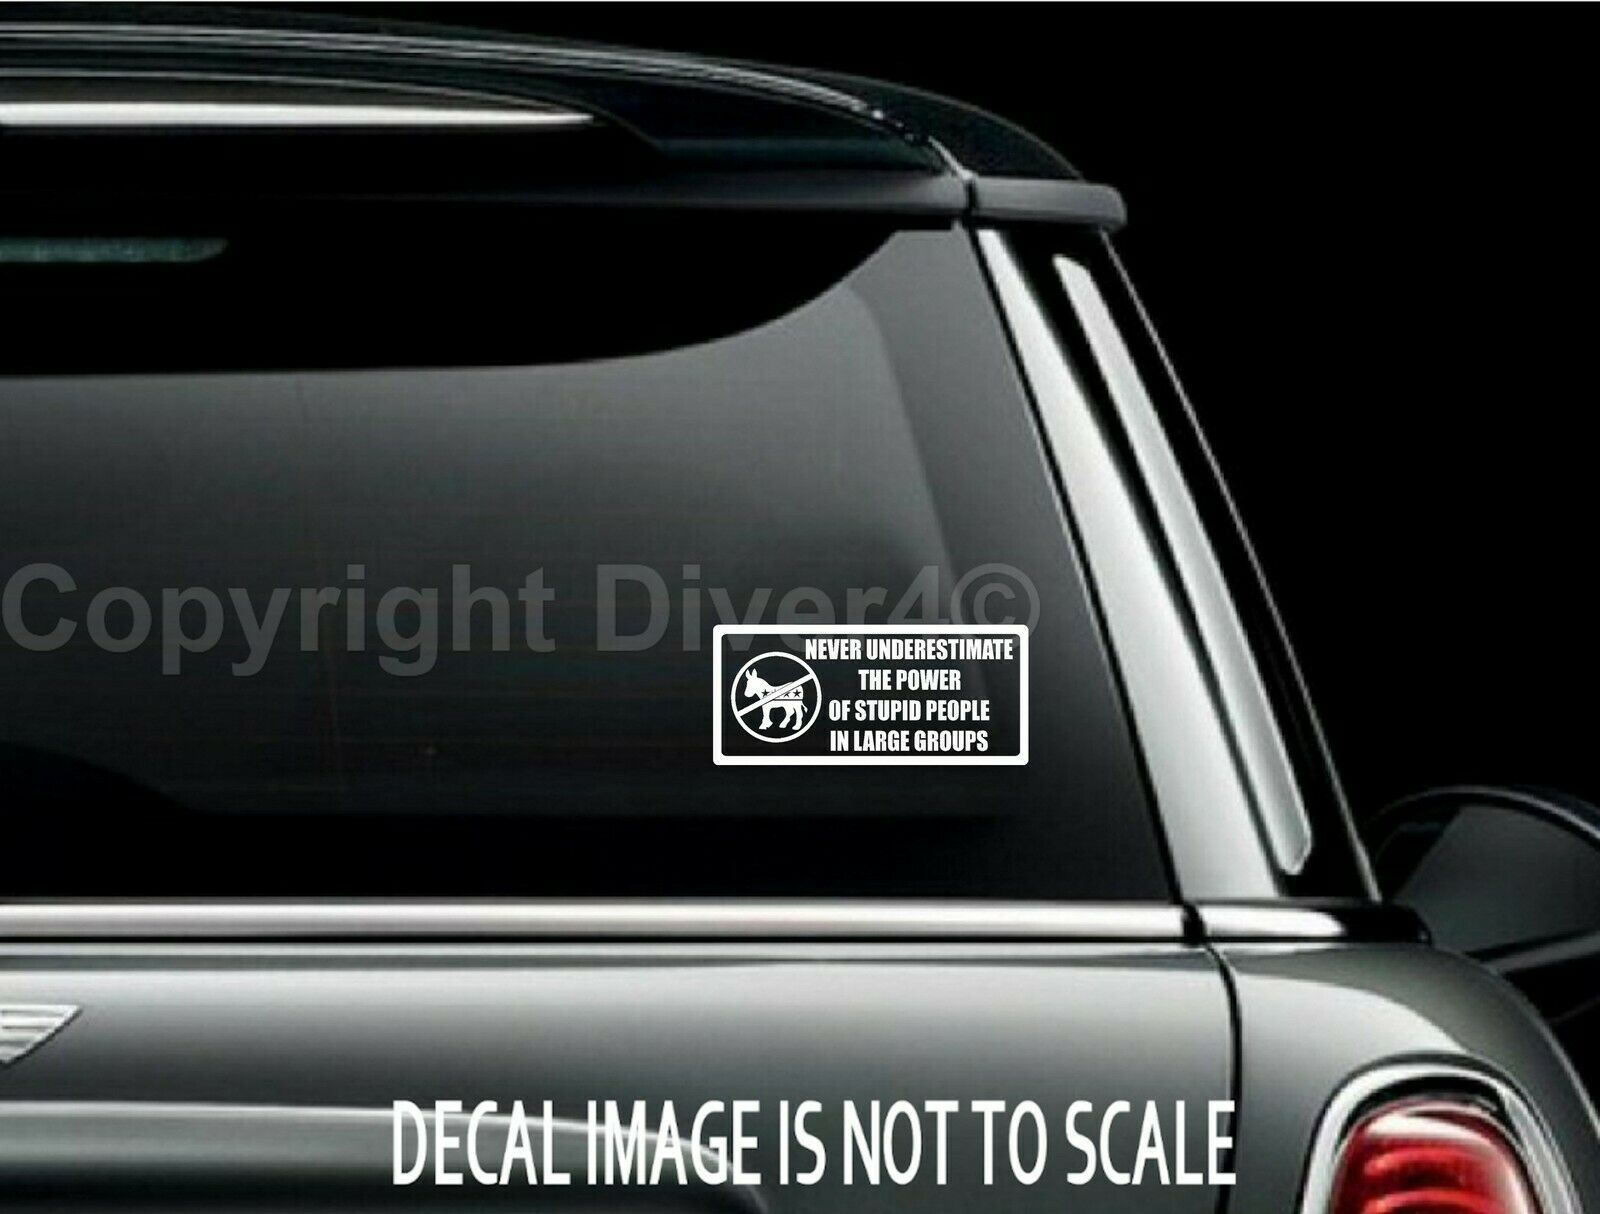 Democrats Never Underestimate the Power of Stupid People Window Decal US Sellr - £5.24 GBP - £7.18 GBP